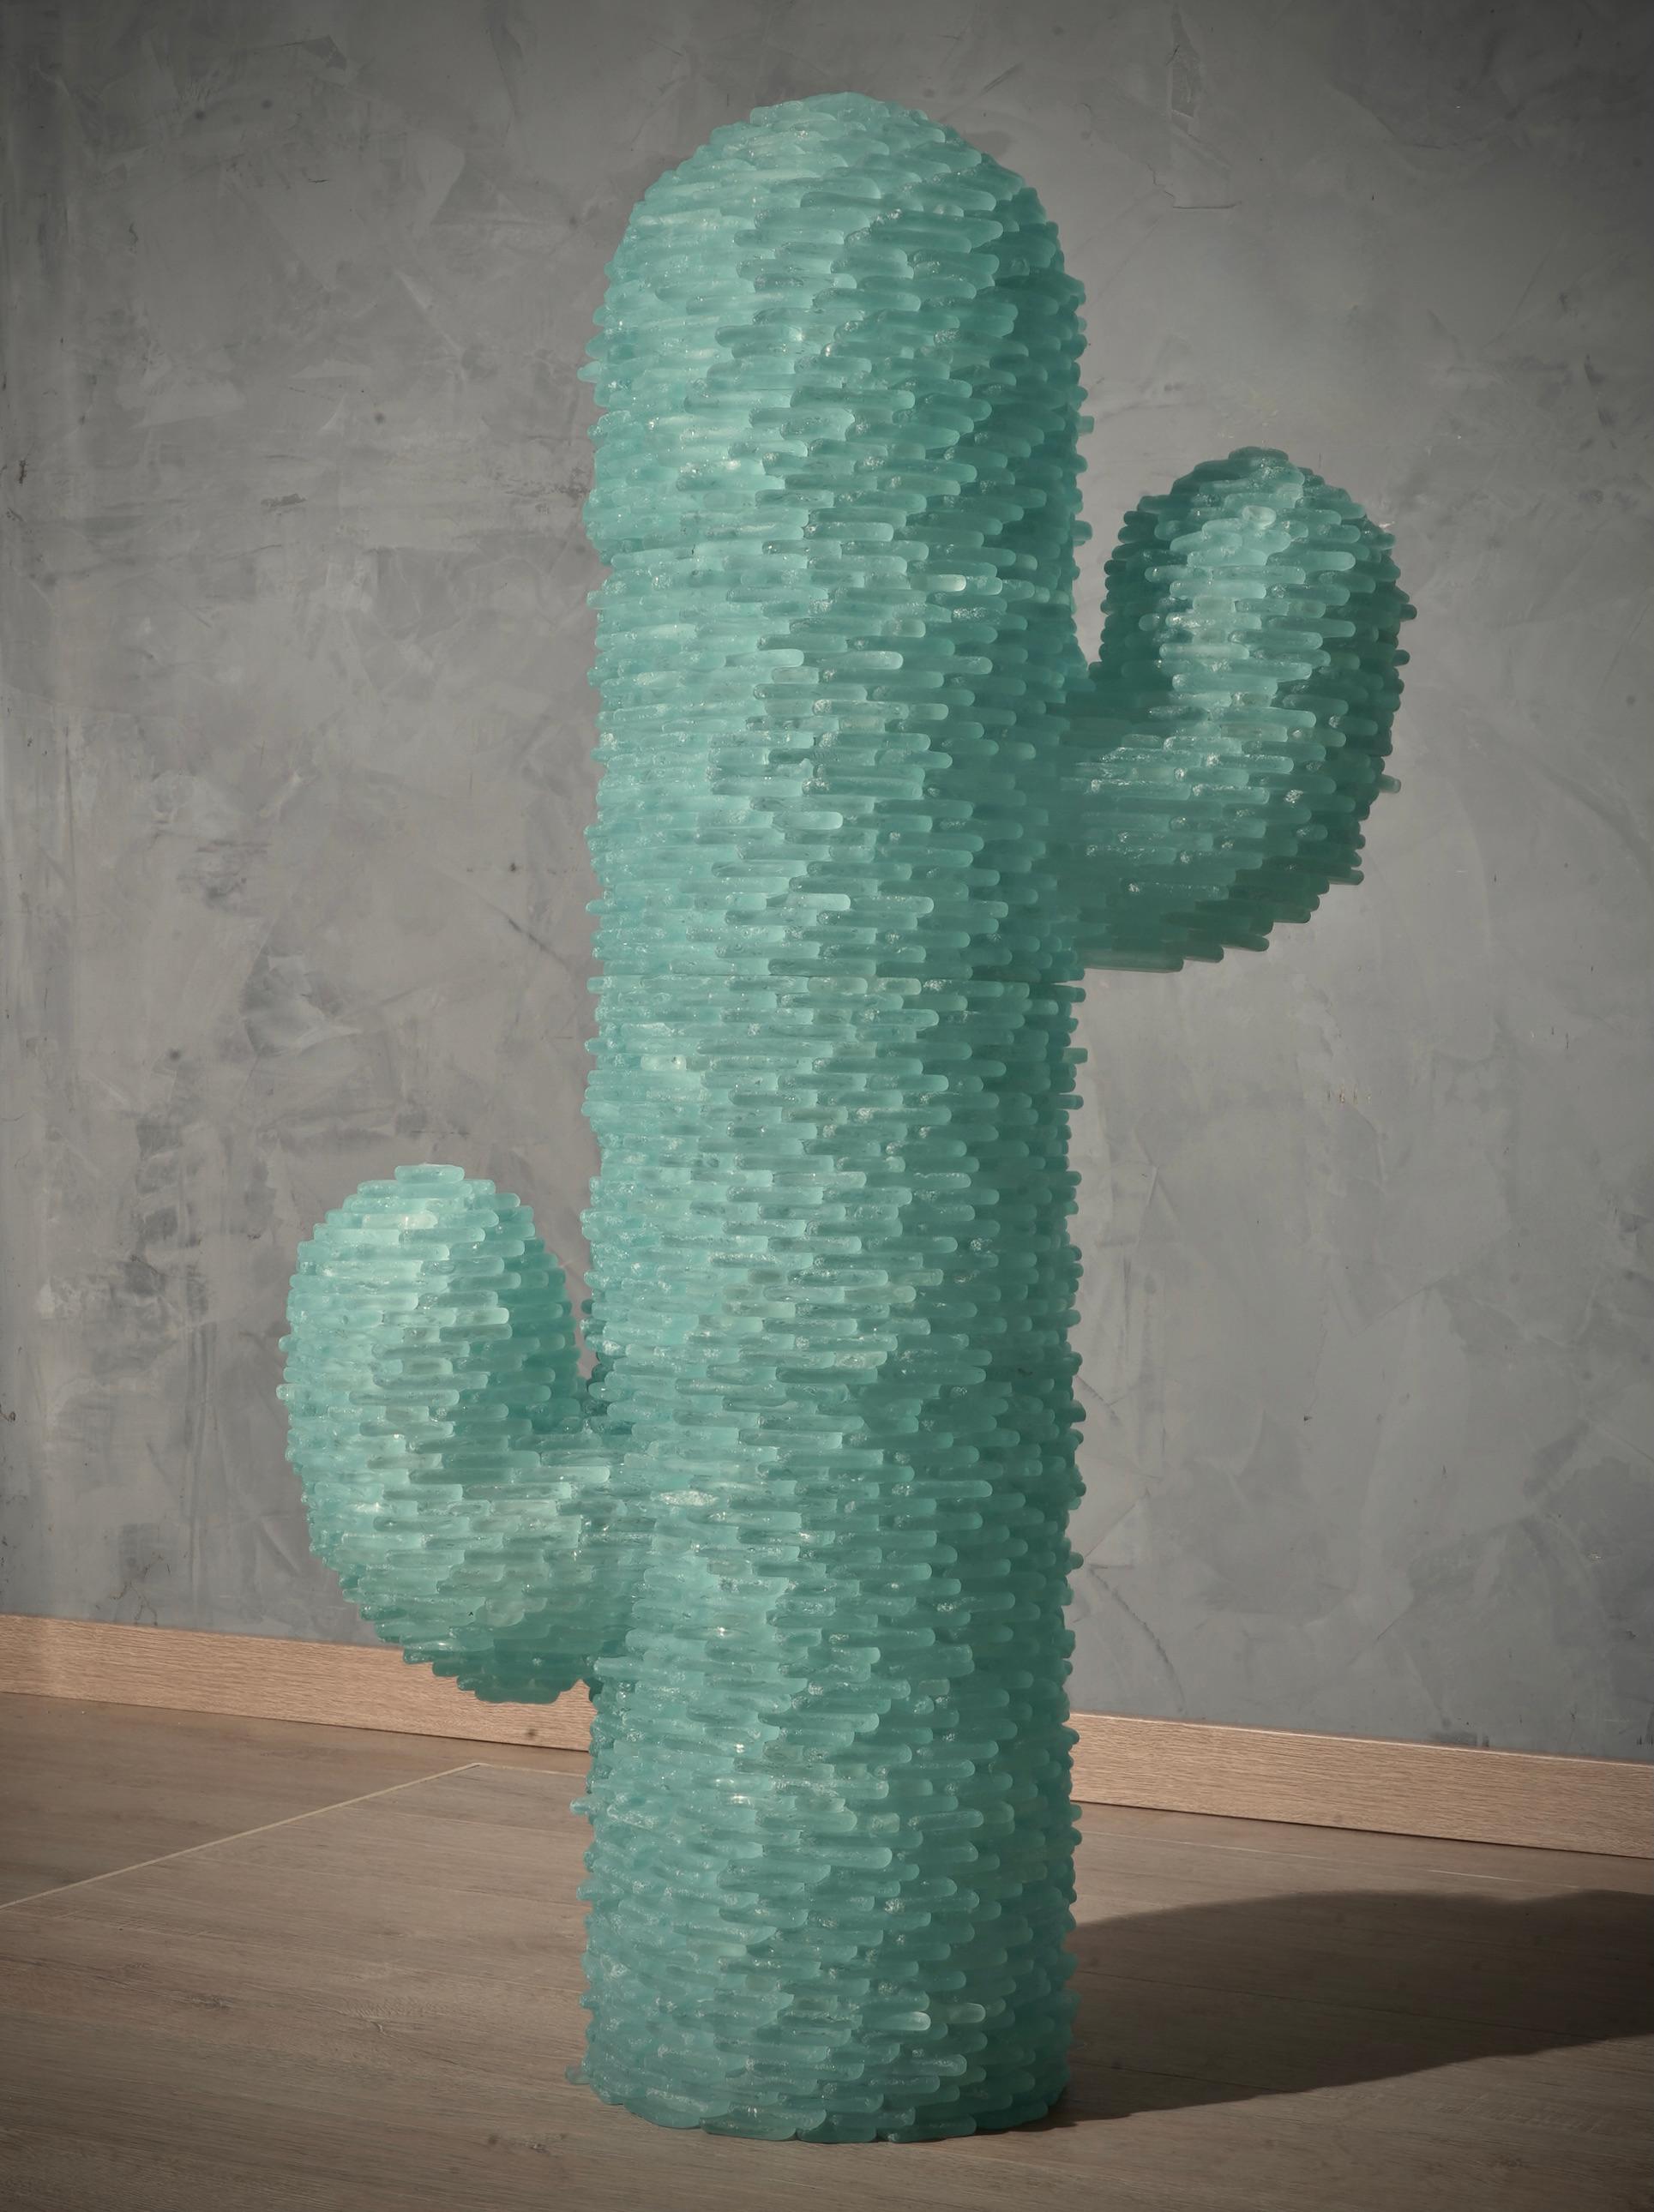 Splendid illuminated sculpture entirely in very fine Murano glass plates of a splendid sea water green color.

More than a floor lamp, it is a cactus sculpture made up of small pieces of sea-green colored Murano glass. It is made up of a series of